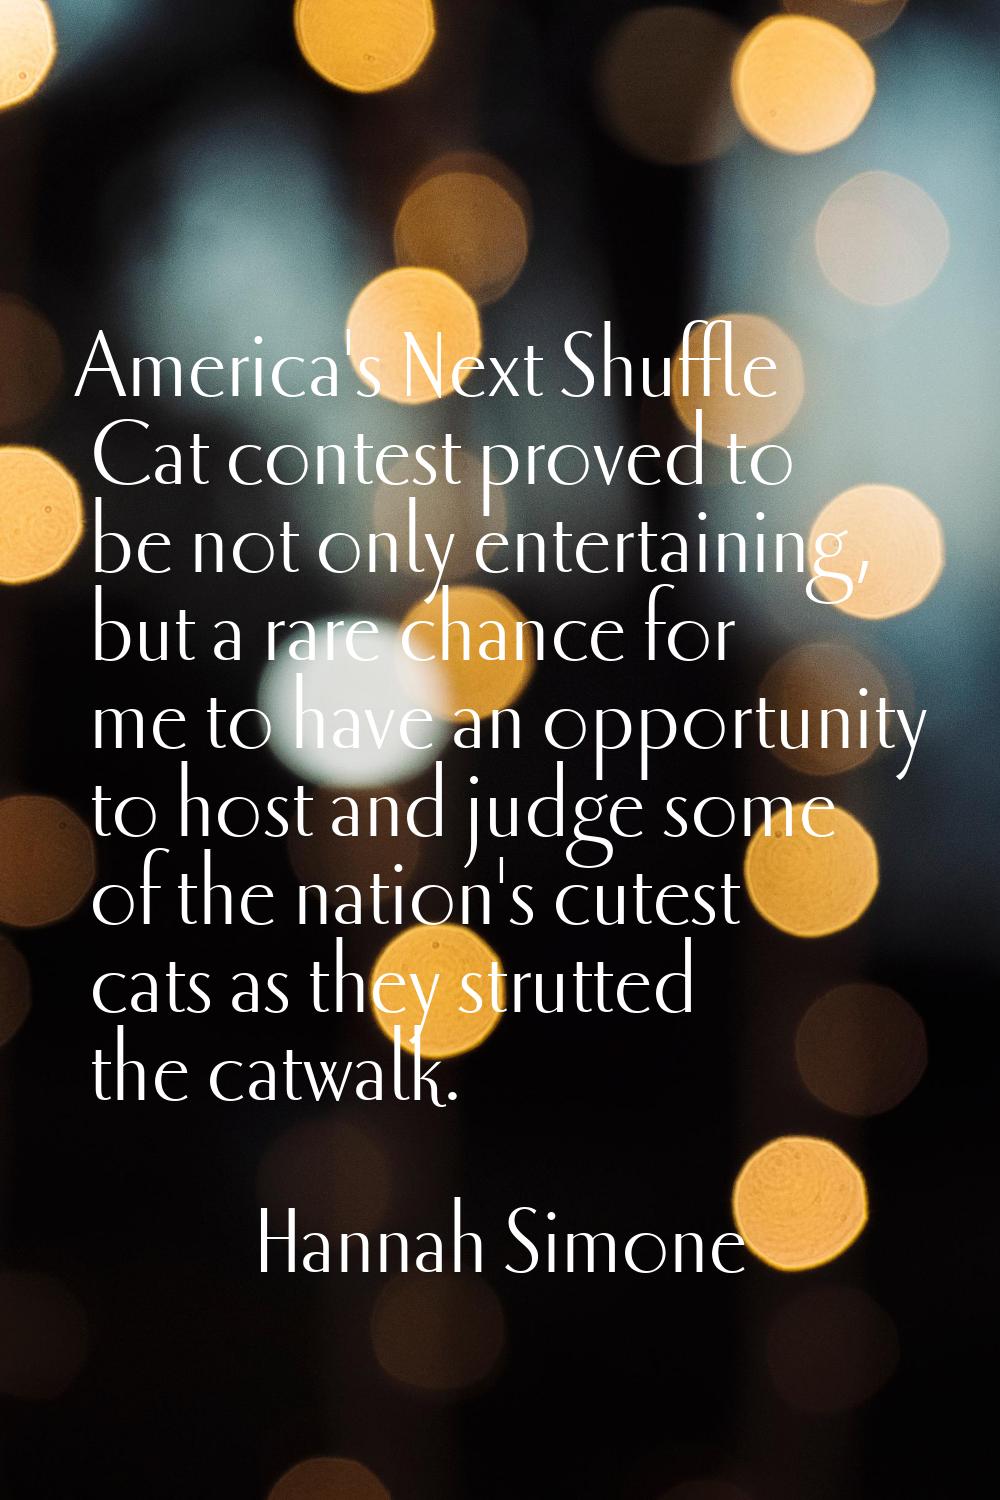 America's Next Shuffle Cat contest proved to be not only entertaining, but a rare chance for me to 